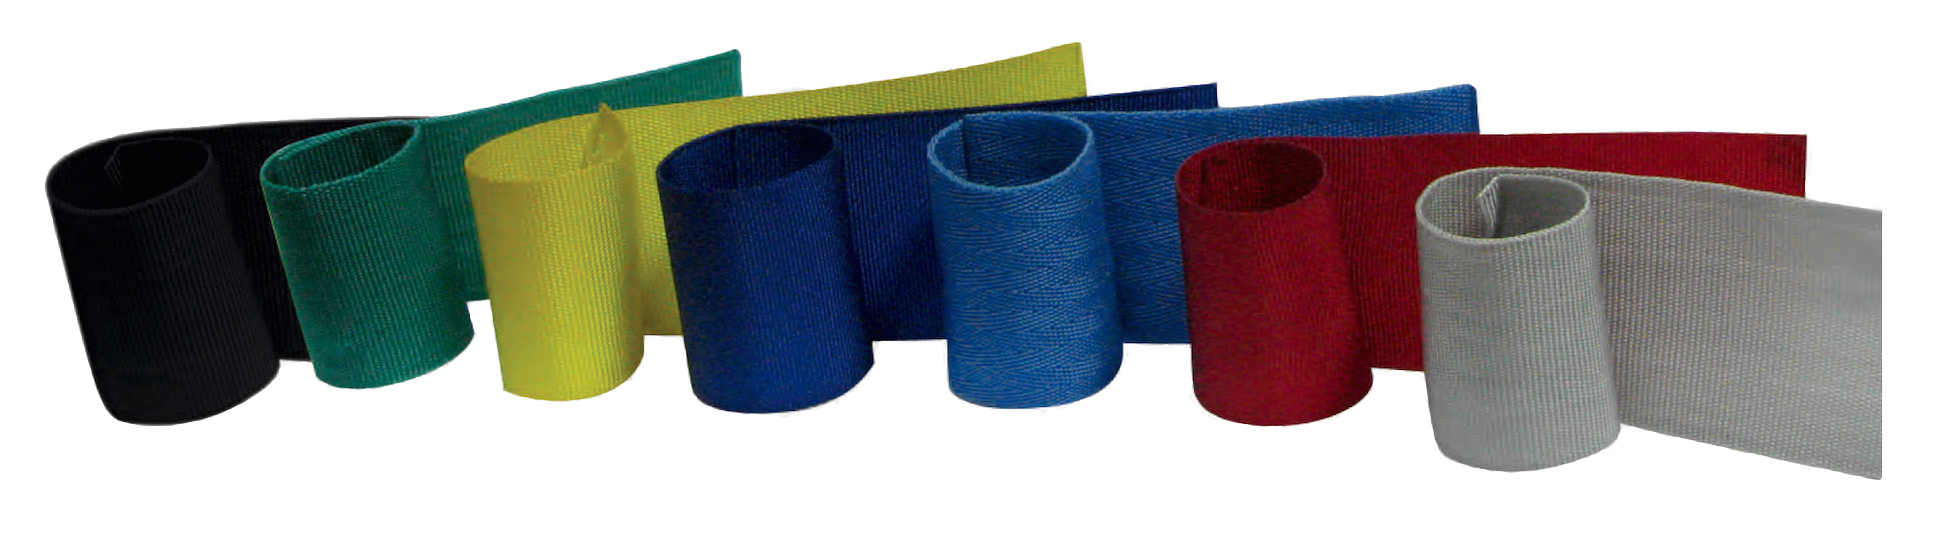 Fora Barrier Systems - Colors of Belts